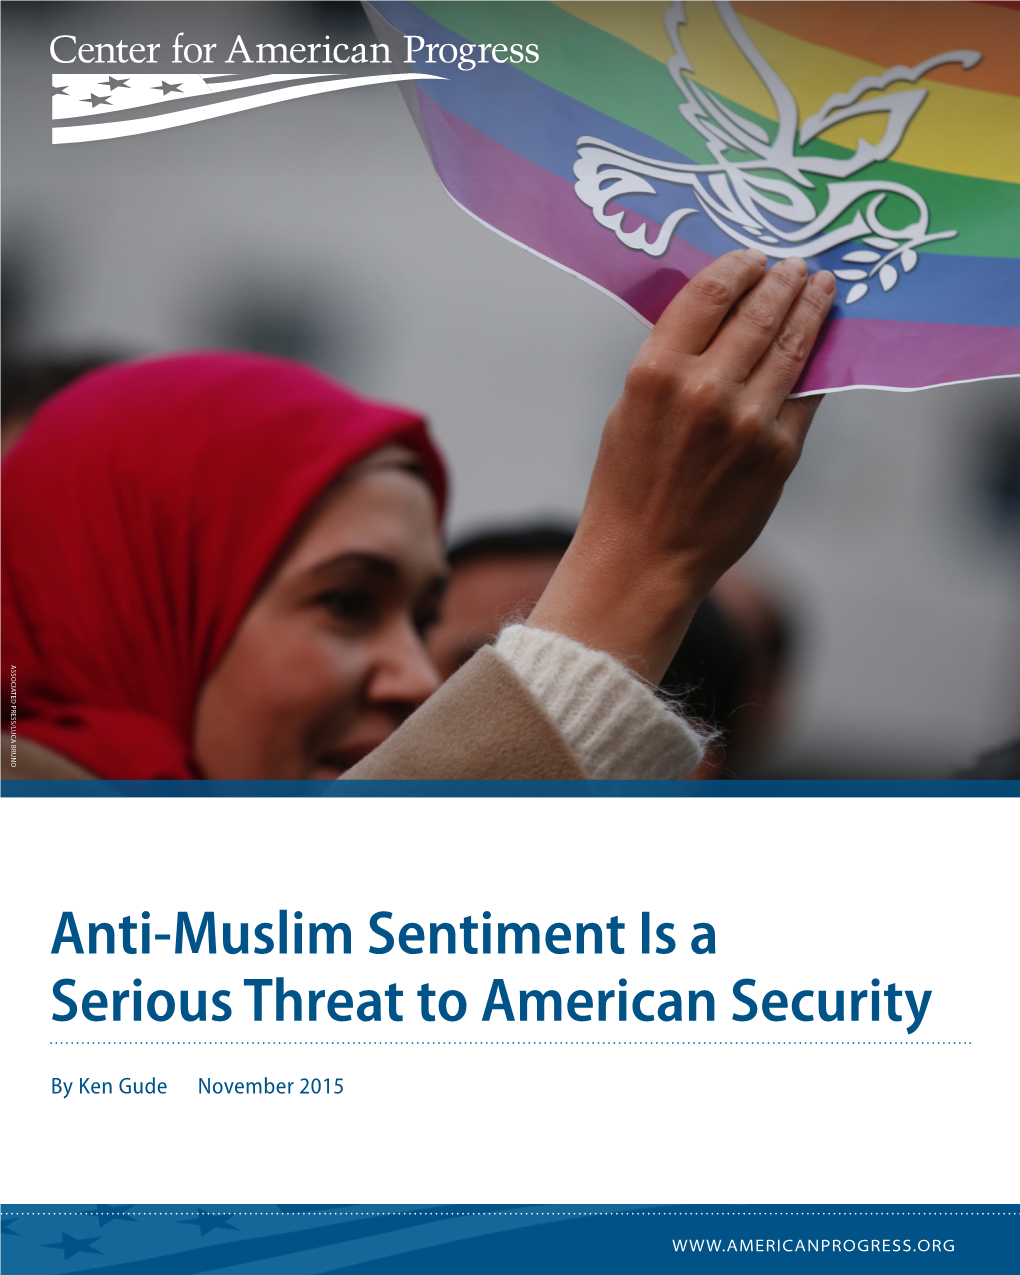 Anti-Muslim Sentiment Is a Serious Threat to American Security